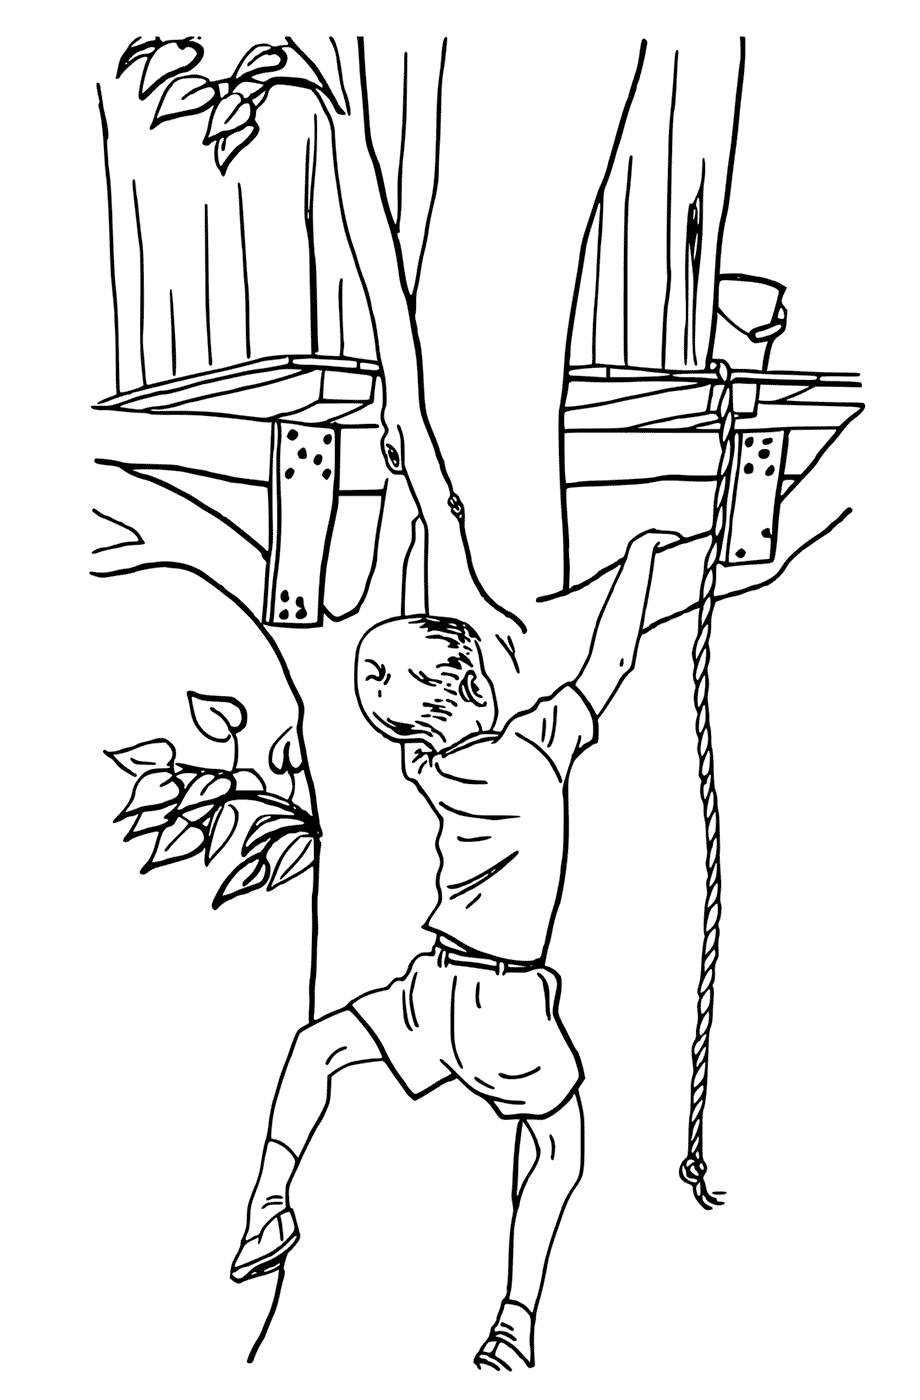 Treehouse Coloring Pages Best Coloring Pages For Kids